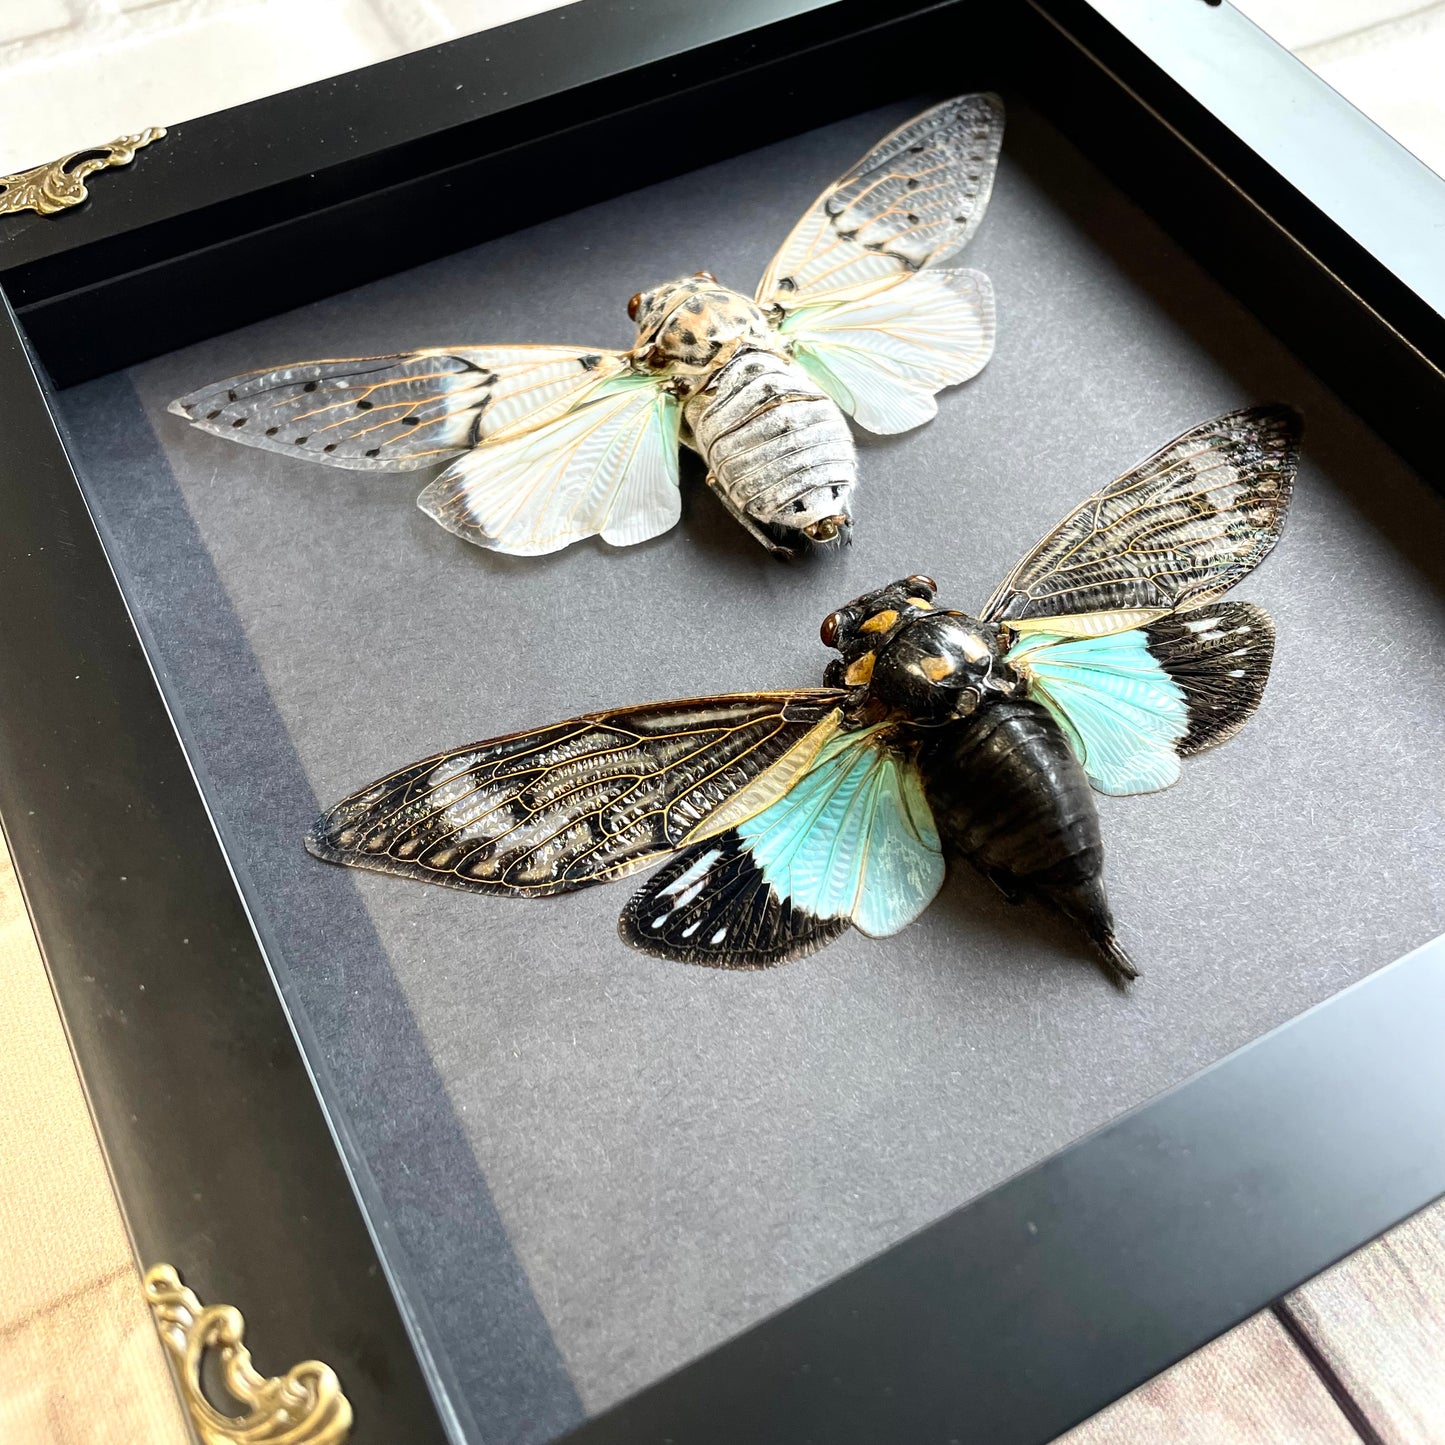 Cicada Pair White Ghost + Turquoise Wing in Deep Baroque Style Shadow Box Frame Display